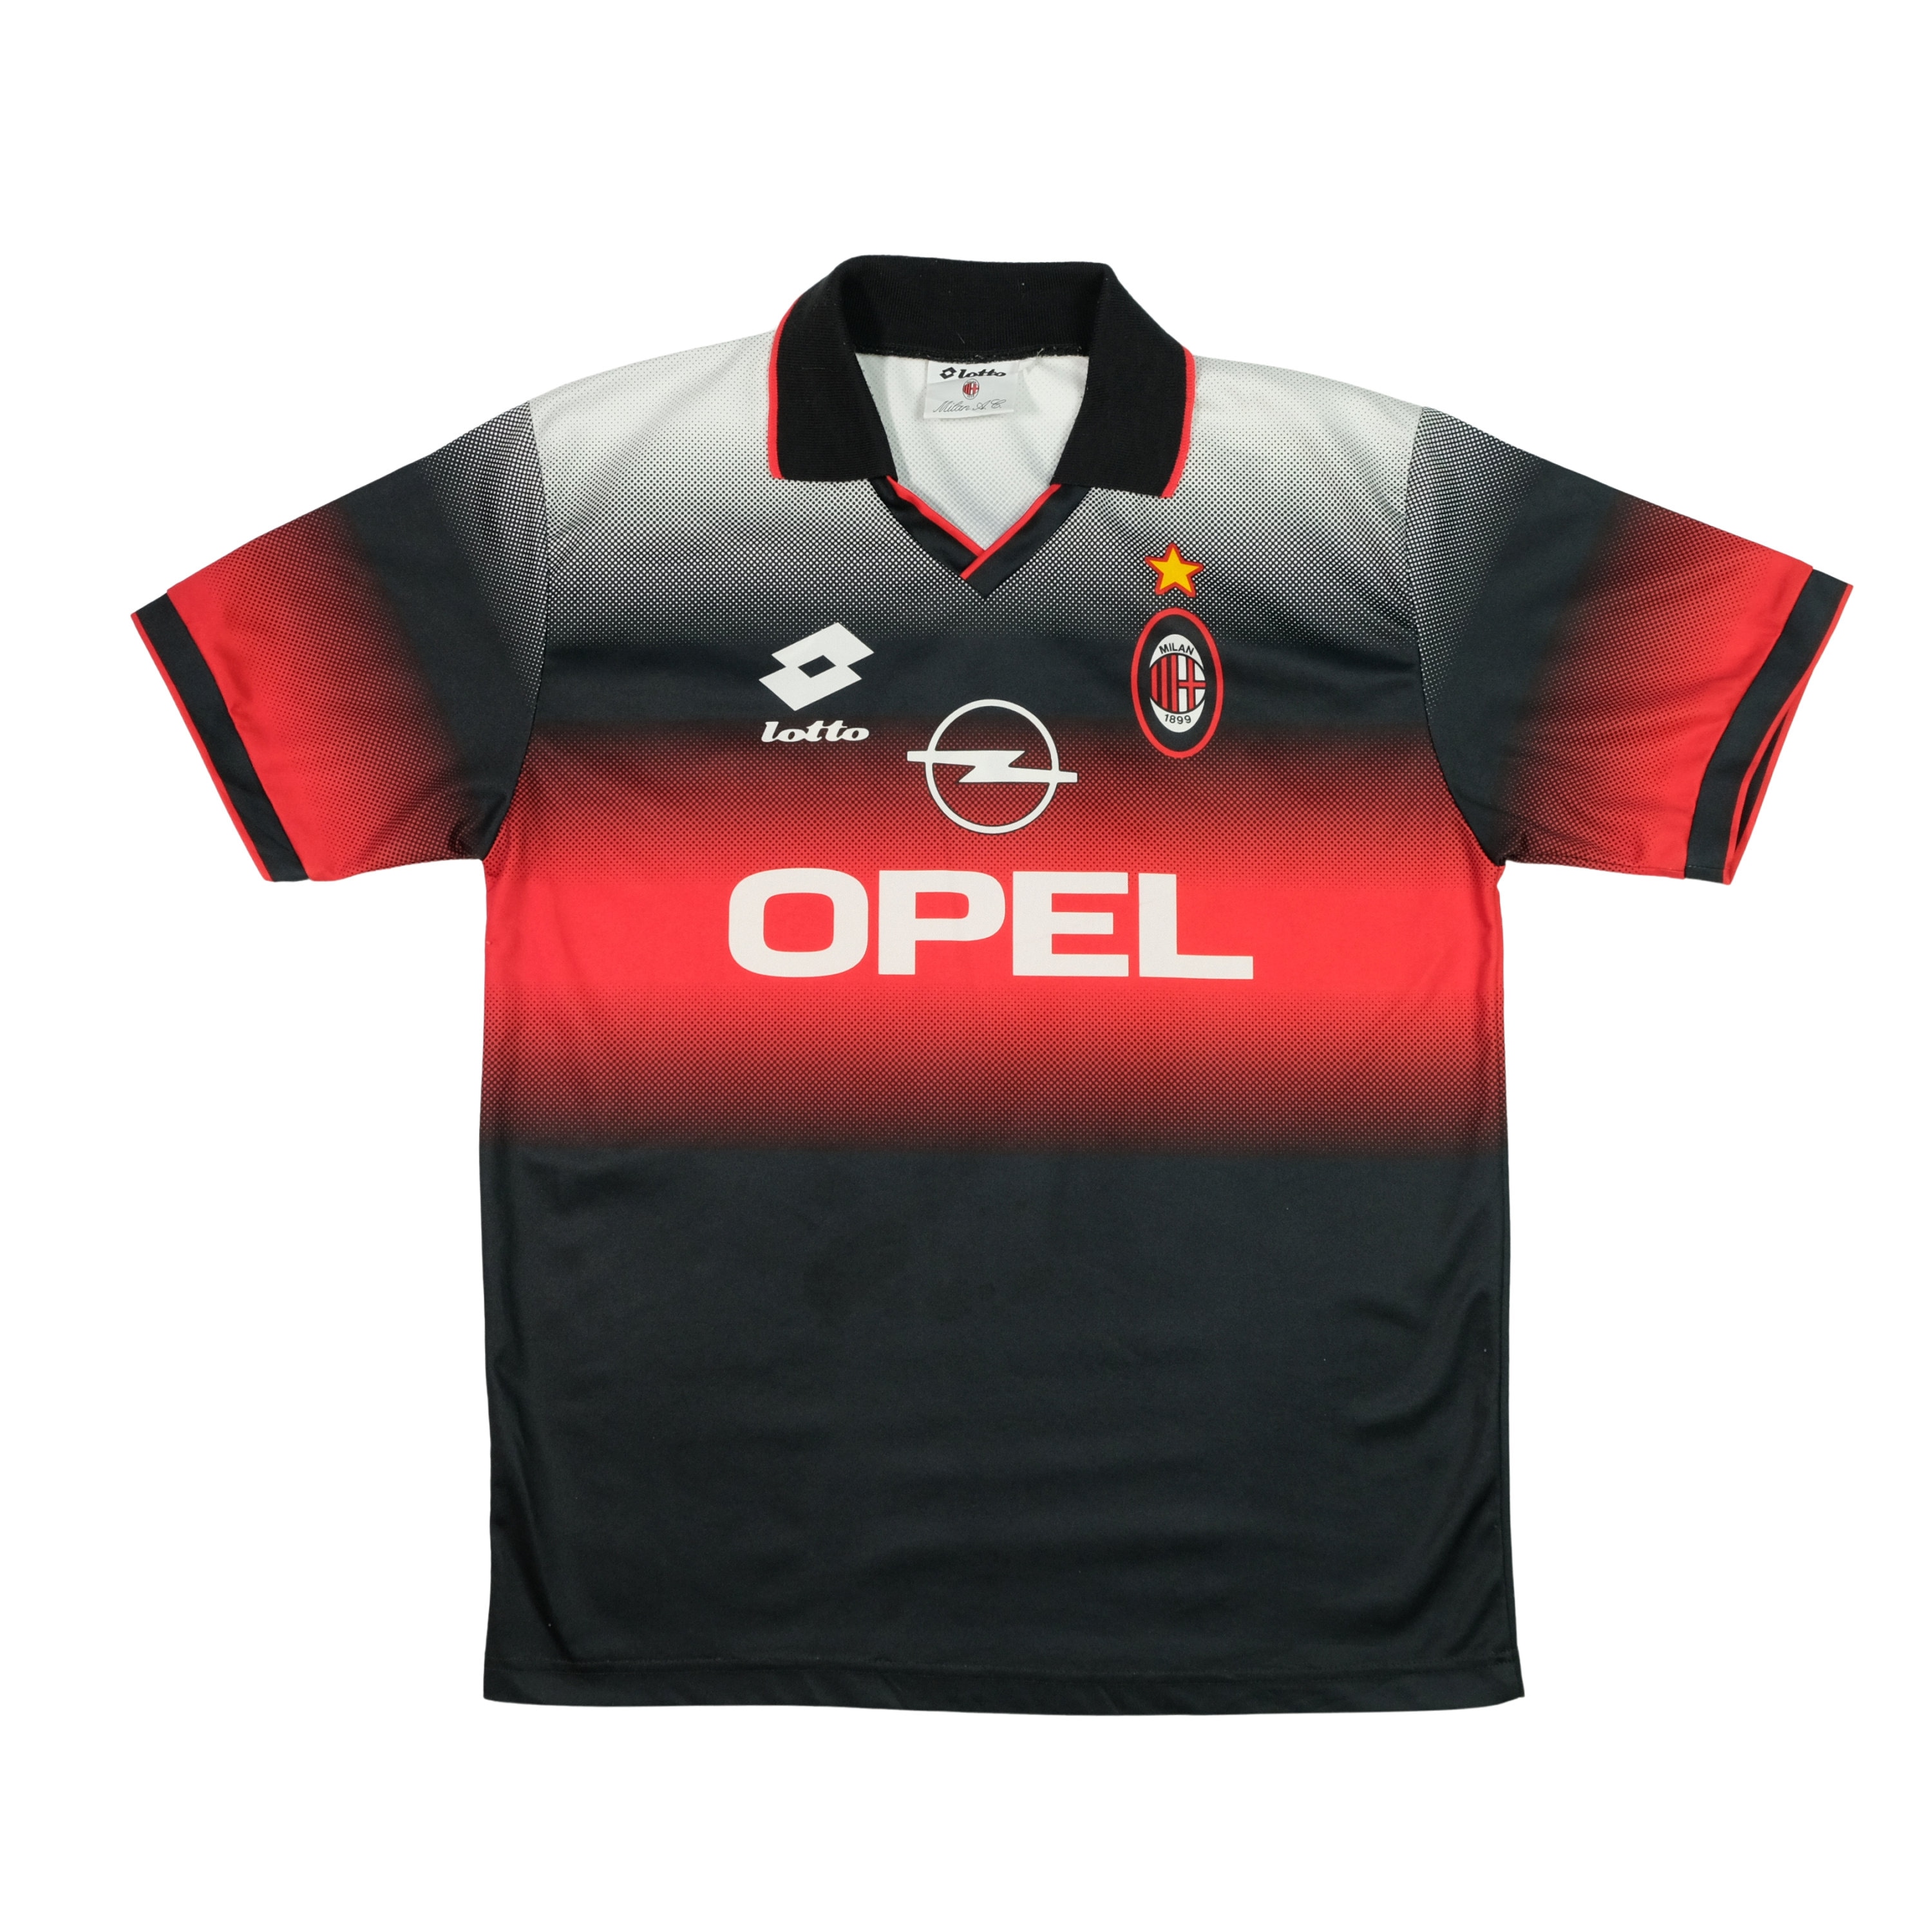 AC MILAN 1996-1997 HOME FOOTBALL SHIRT MAGLIA JERSEY LOTTO OPEL AUTHENTIC  ITALY